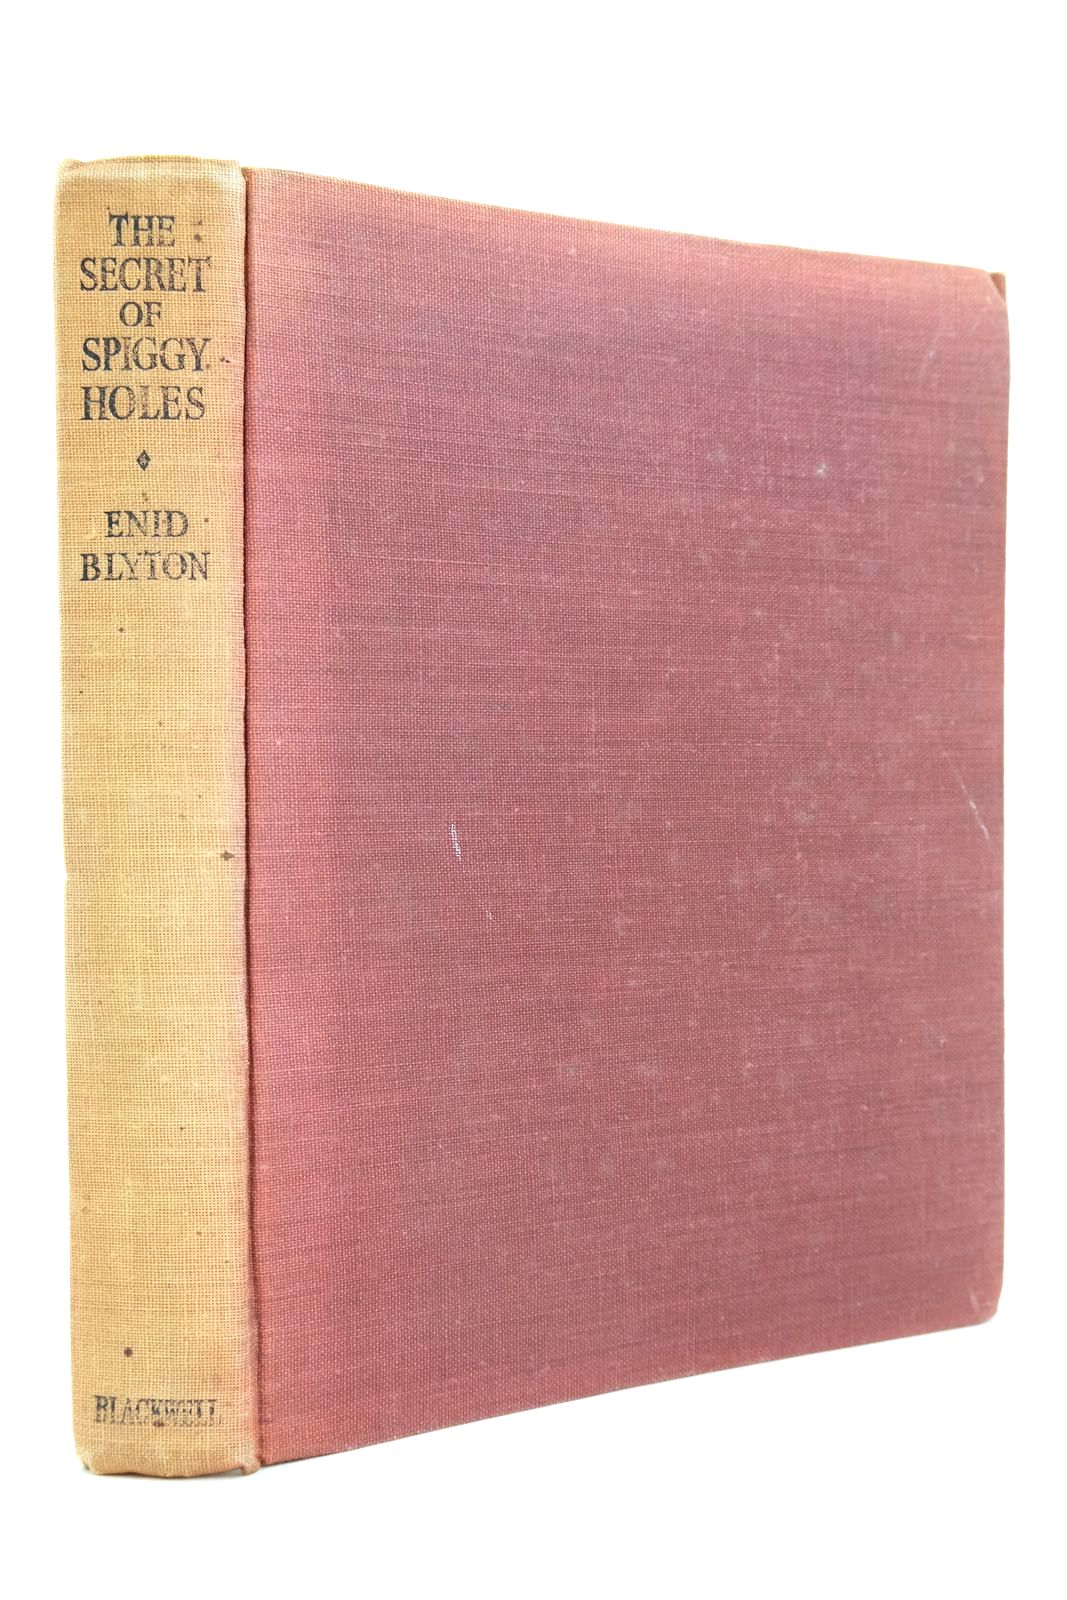 Photo of THE SECRET OF SPIGGY HOLES written by Blyton, Enid illustrated by Davie, E.H. published by Basil Blackwell (STOCK CODE: 2140503)  for sale by Stella & Rose's Books